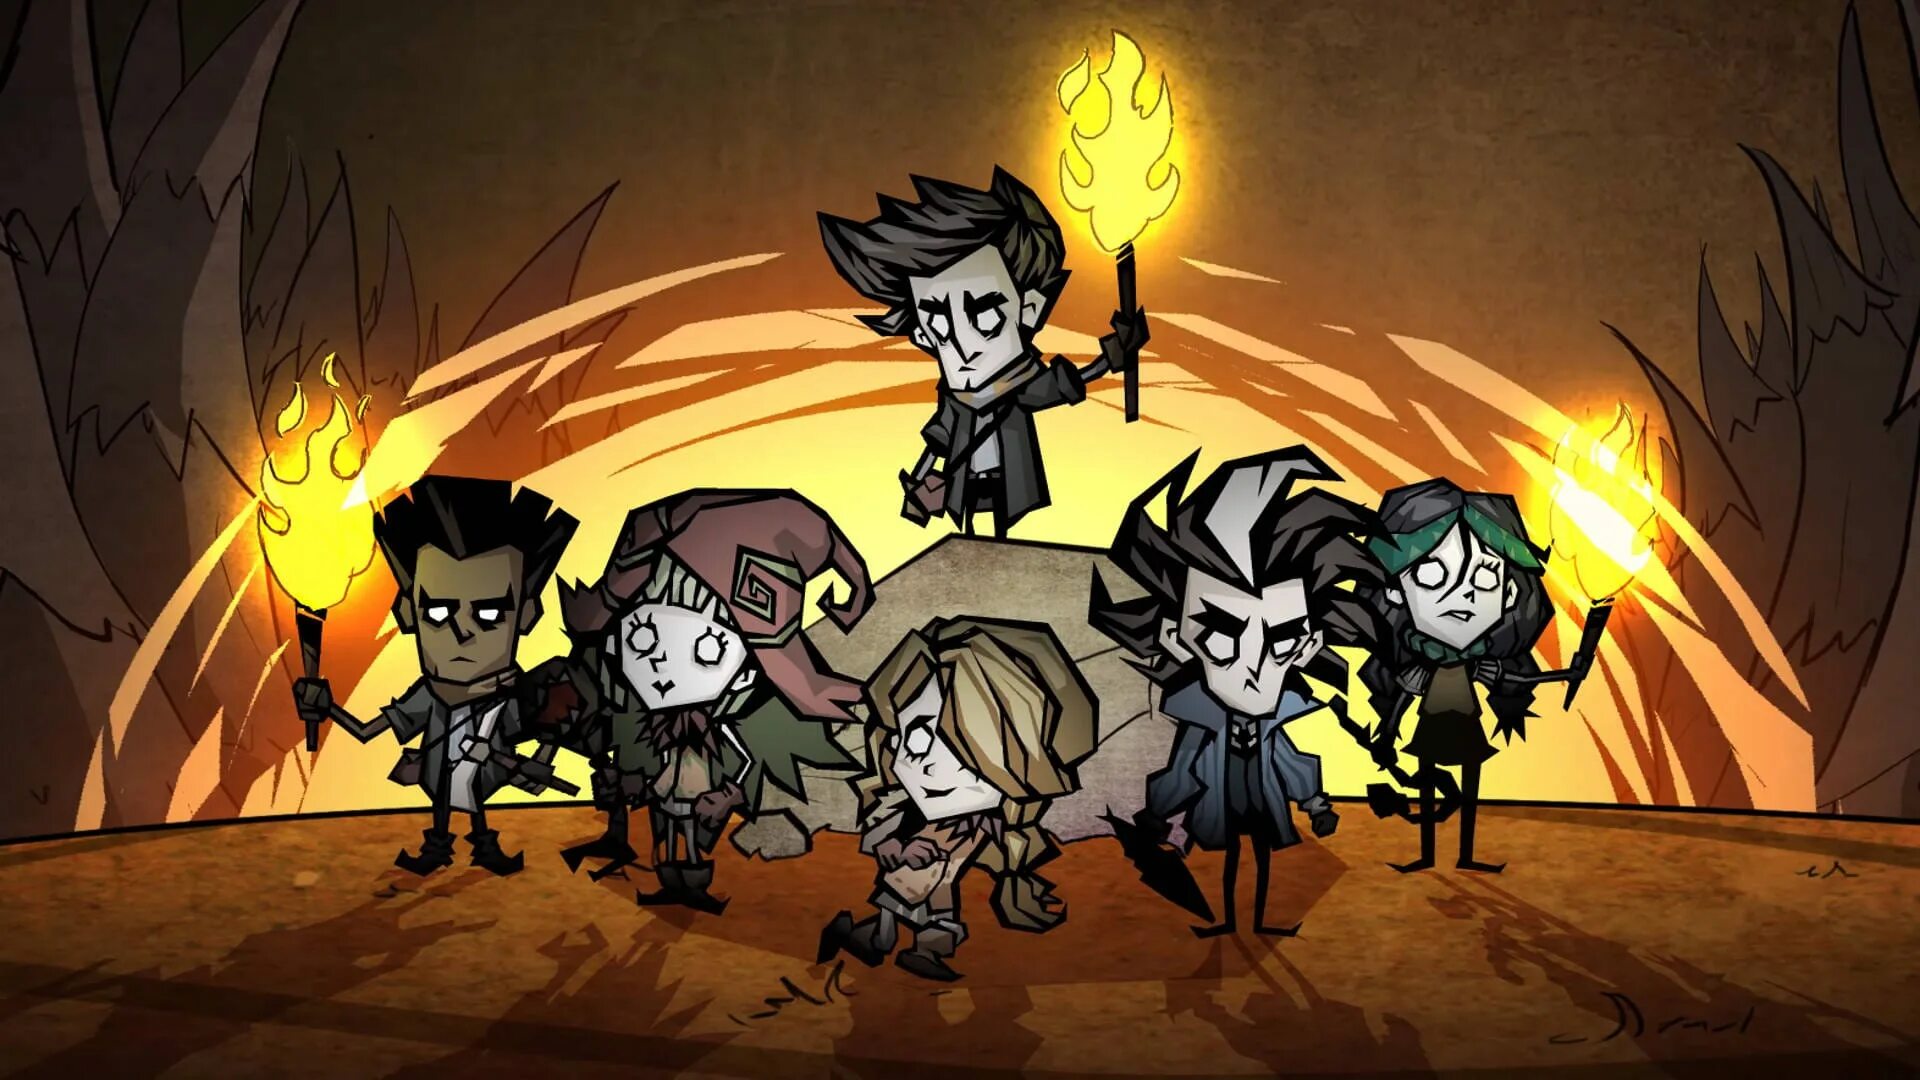 Don't Starve newhome. Донт старв тугезер. Don't Starve New Home. Don t Starve New Home. Don t start new